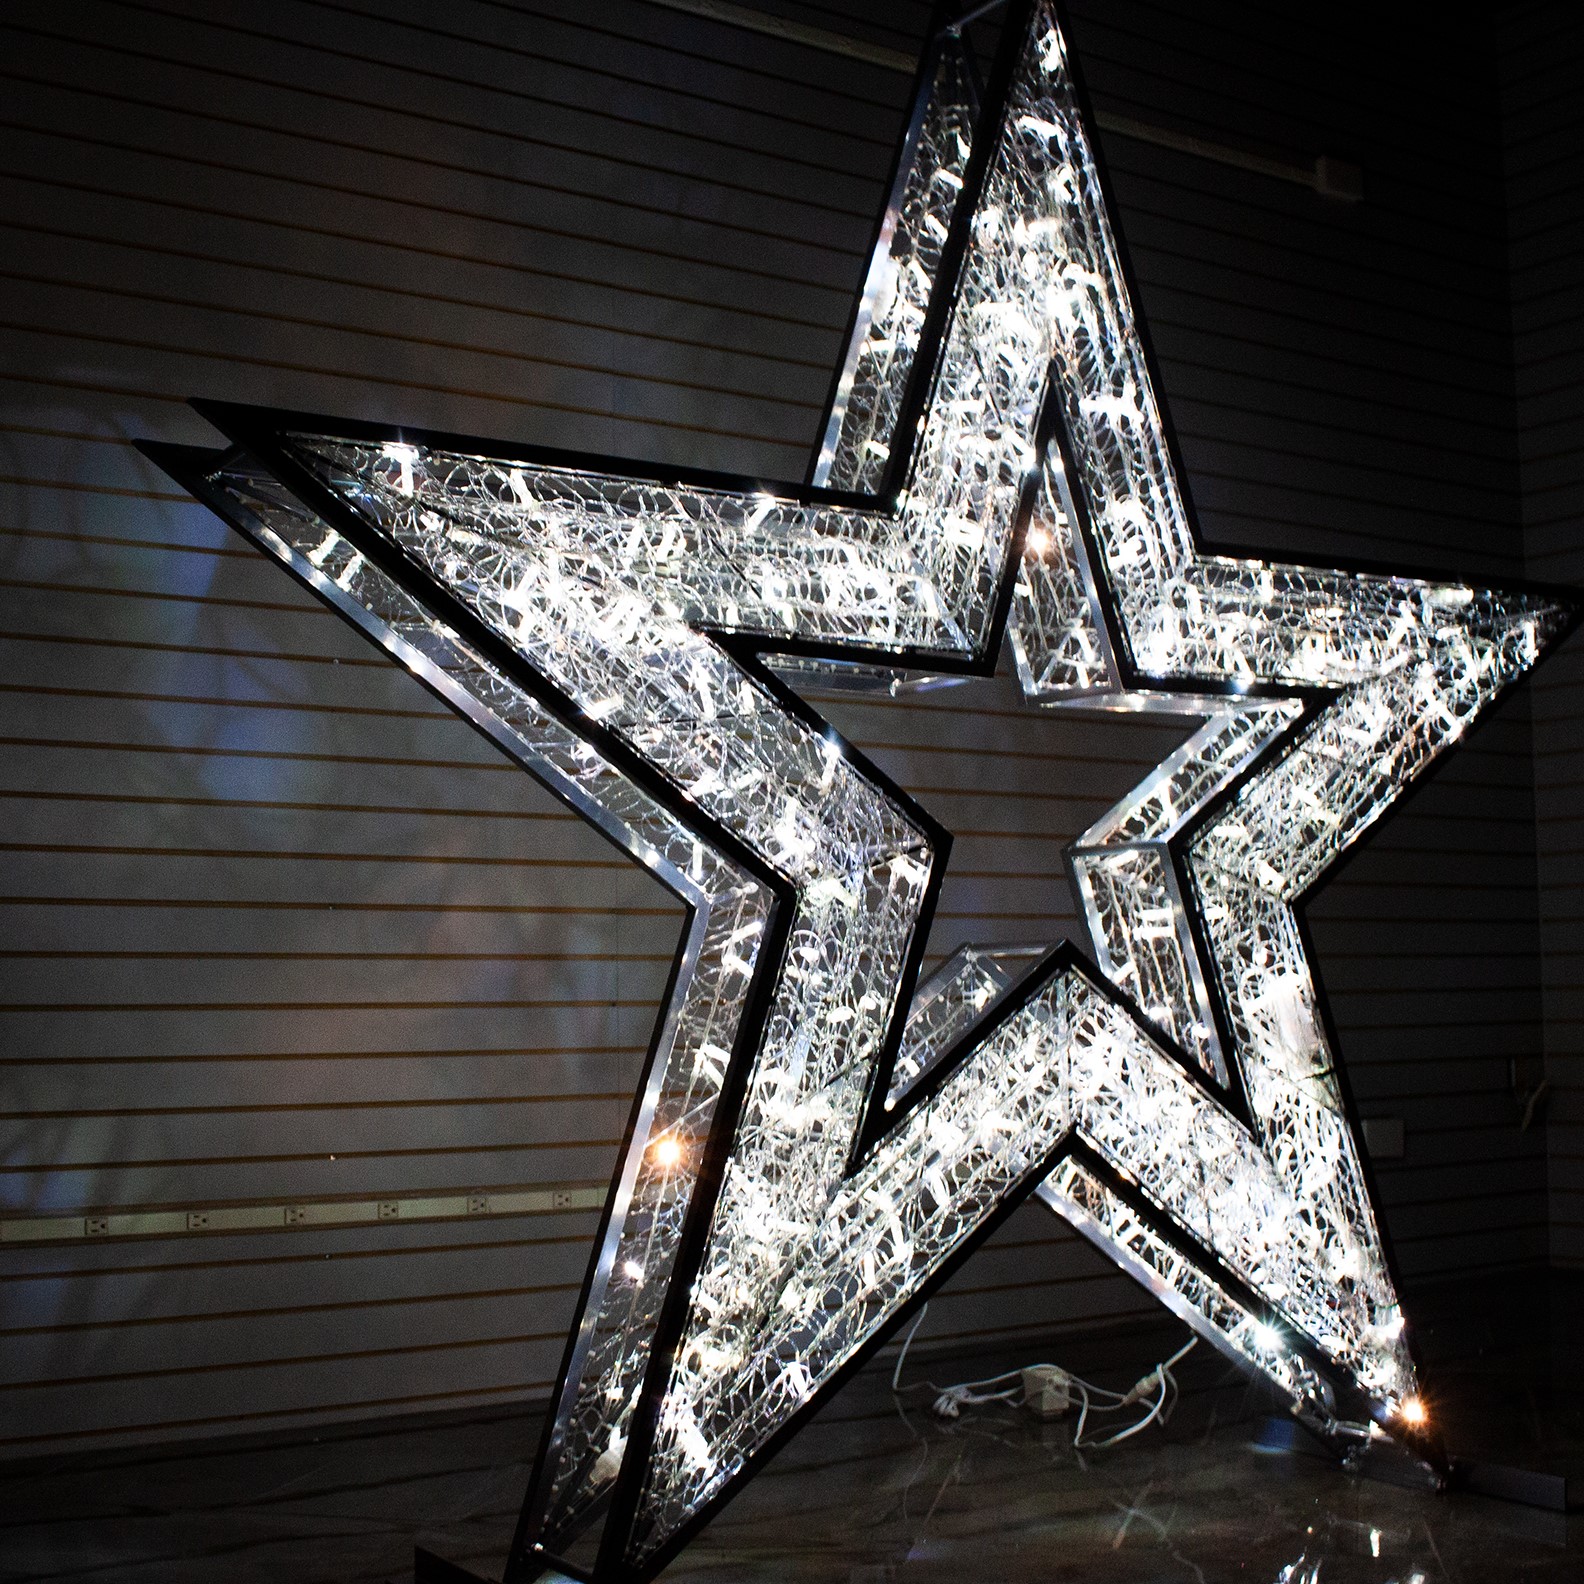 3D Silver Star - 2-sided - Christmas Display - Warm White LED Lights - Medium - 6.5ft tall